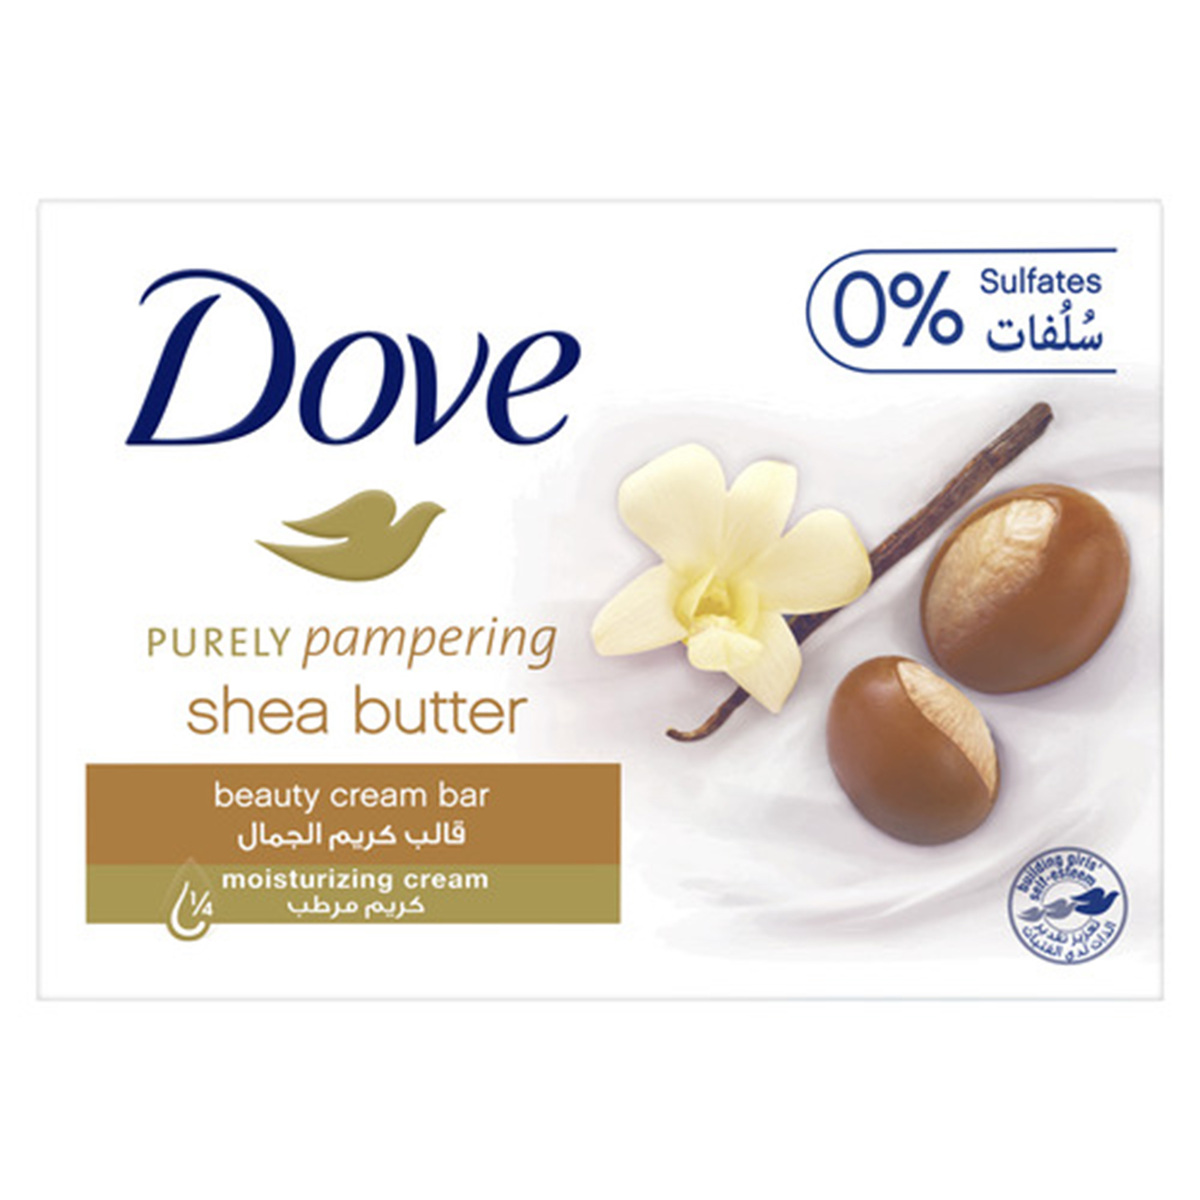 Dove Purely Pampering Beauty Cream Bar Shea Butter 135g